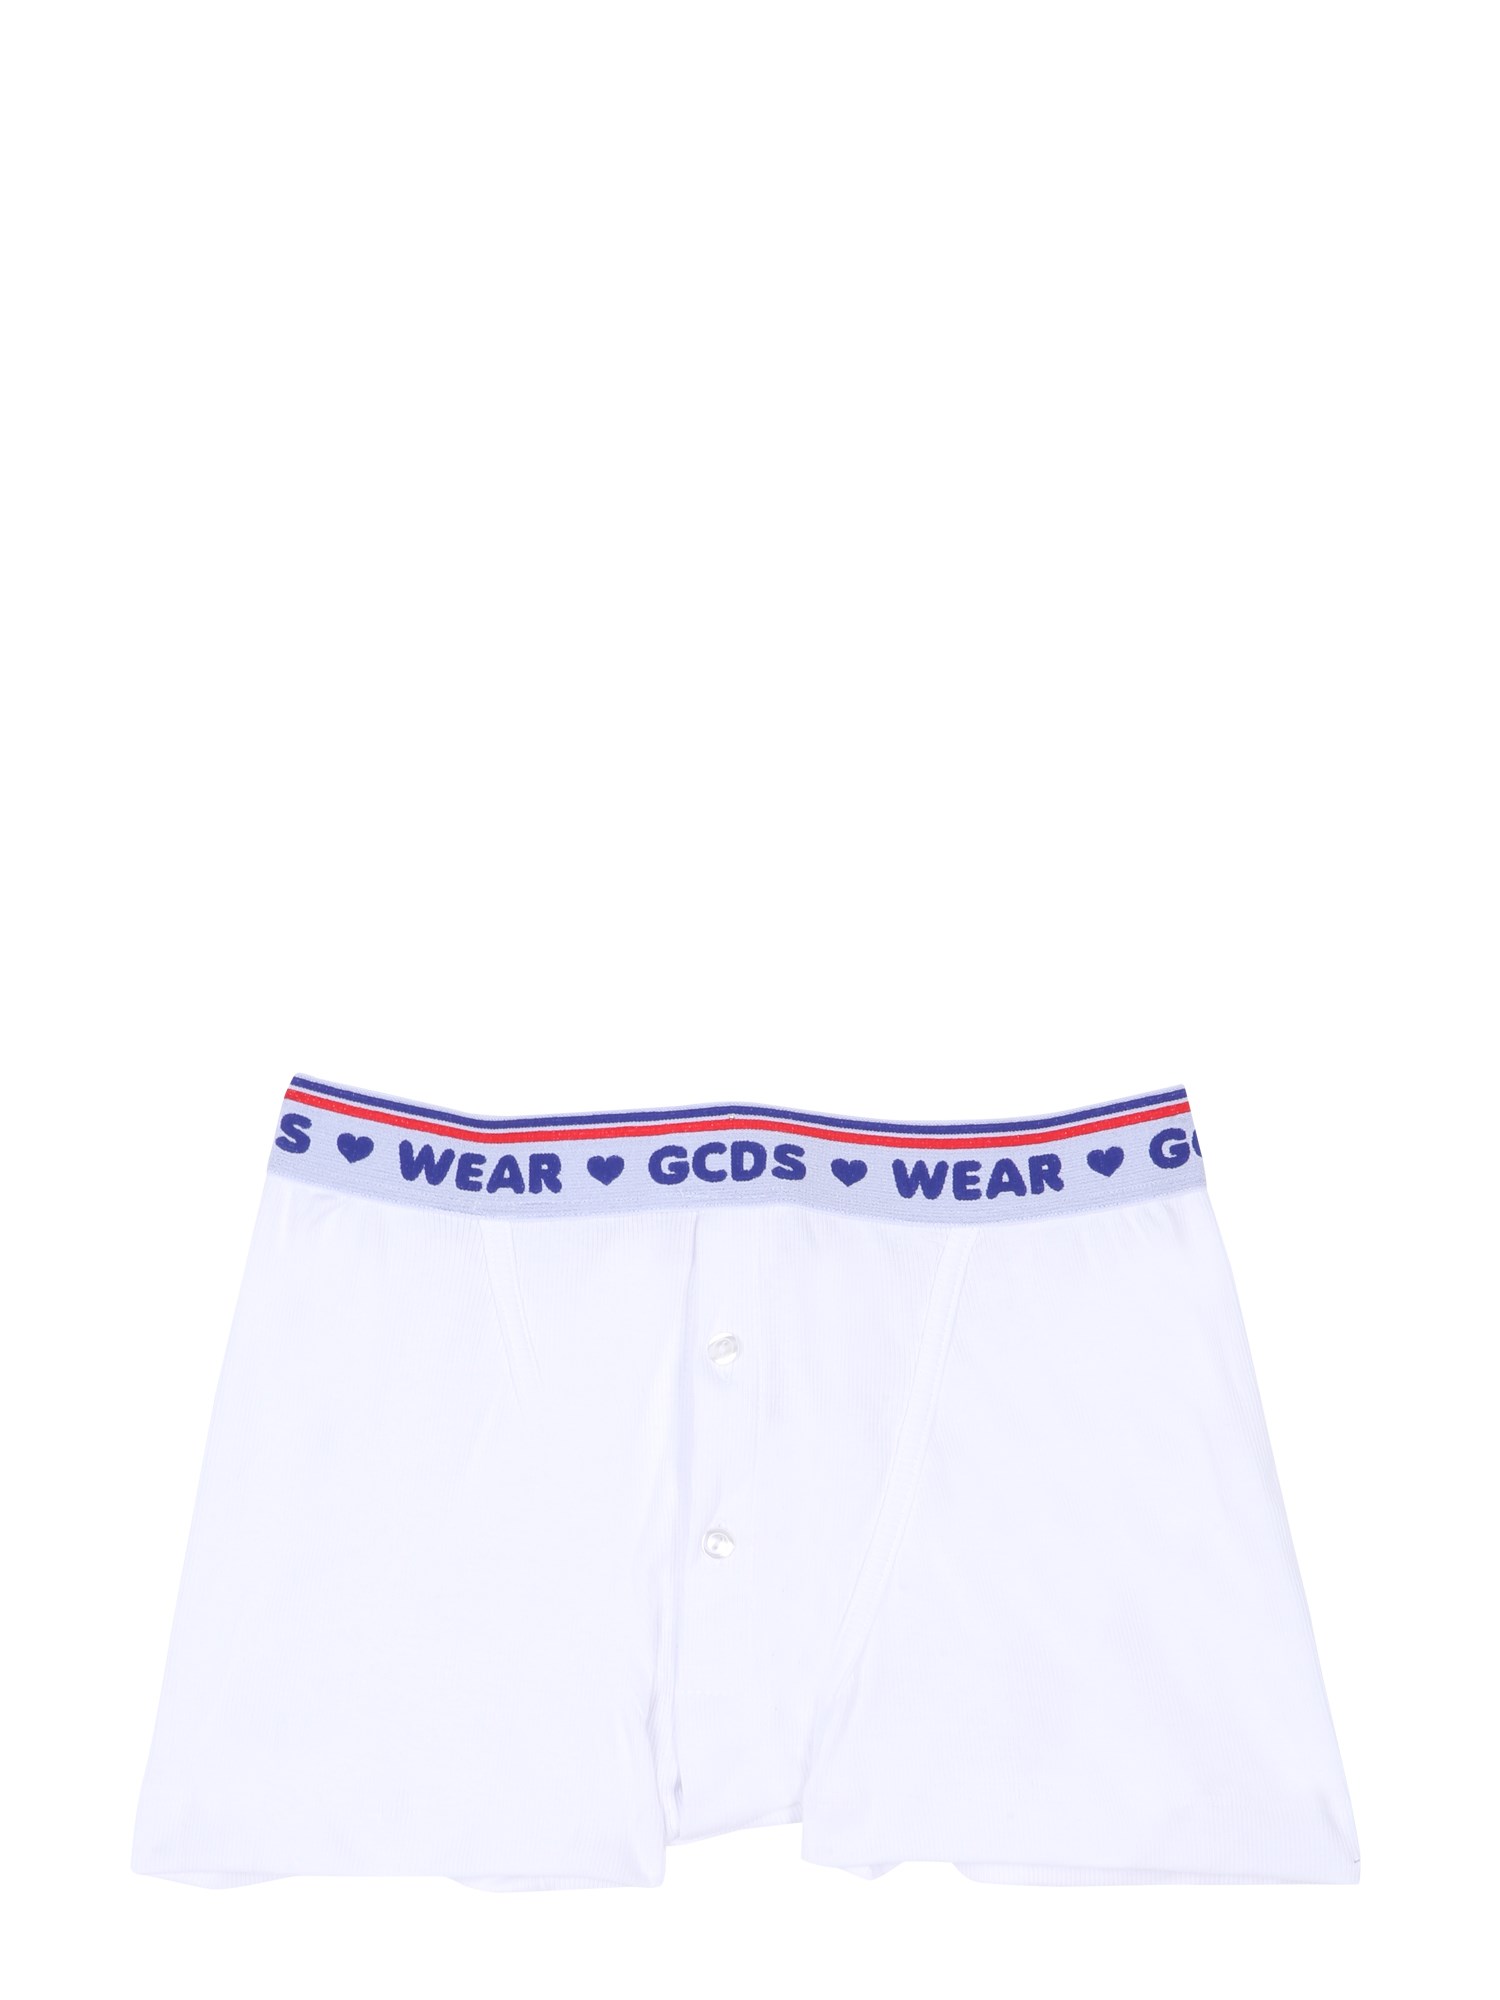 gcds boxers with logo band